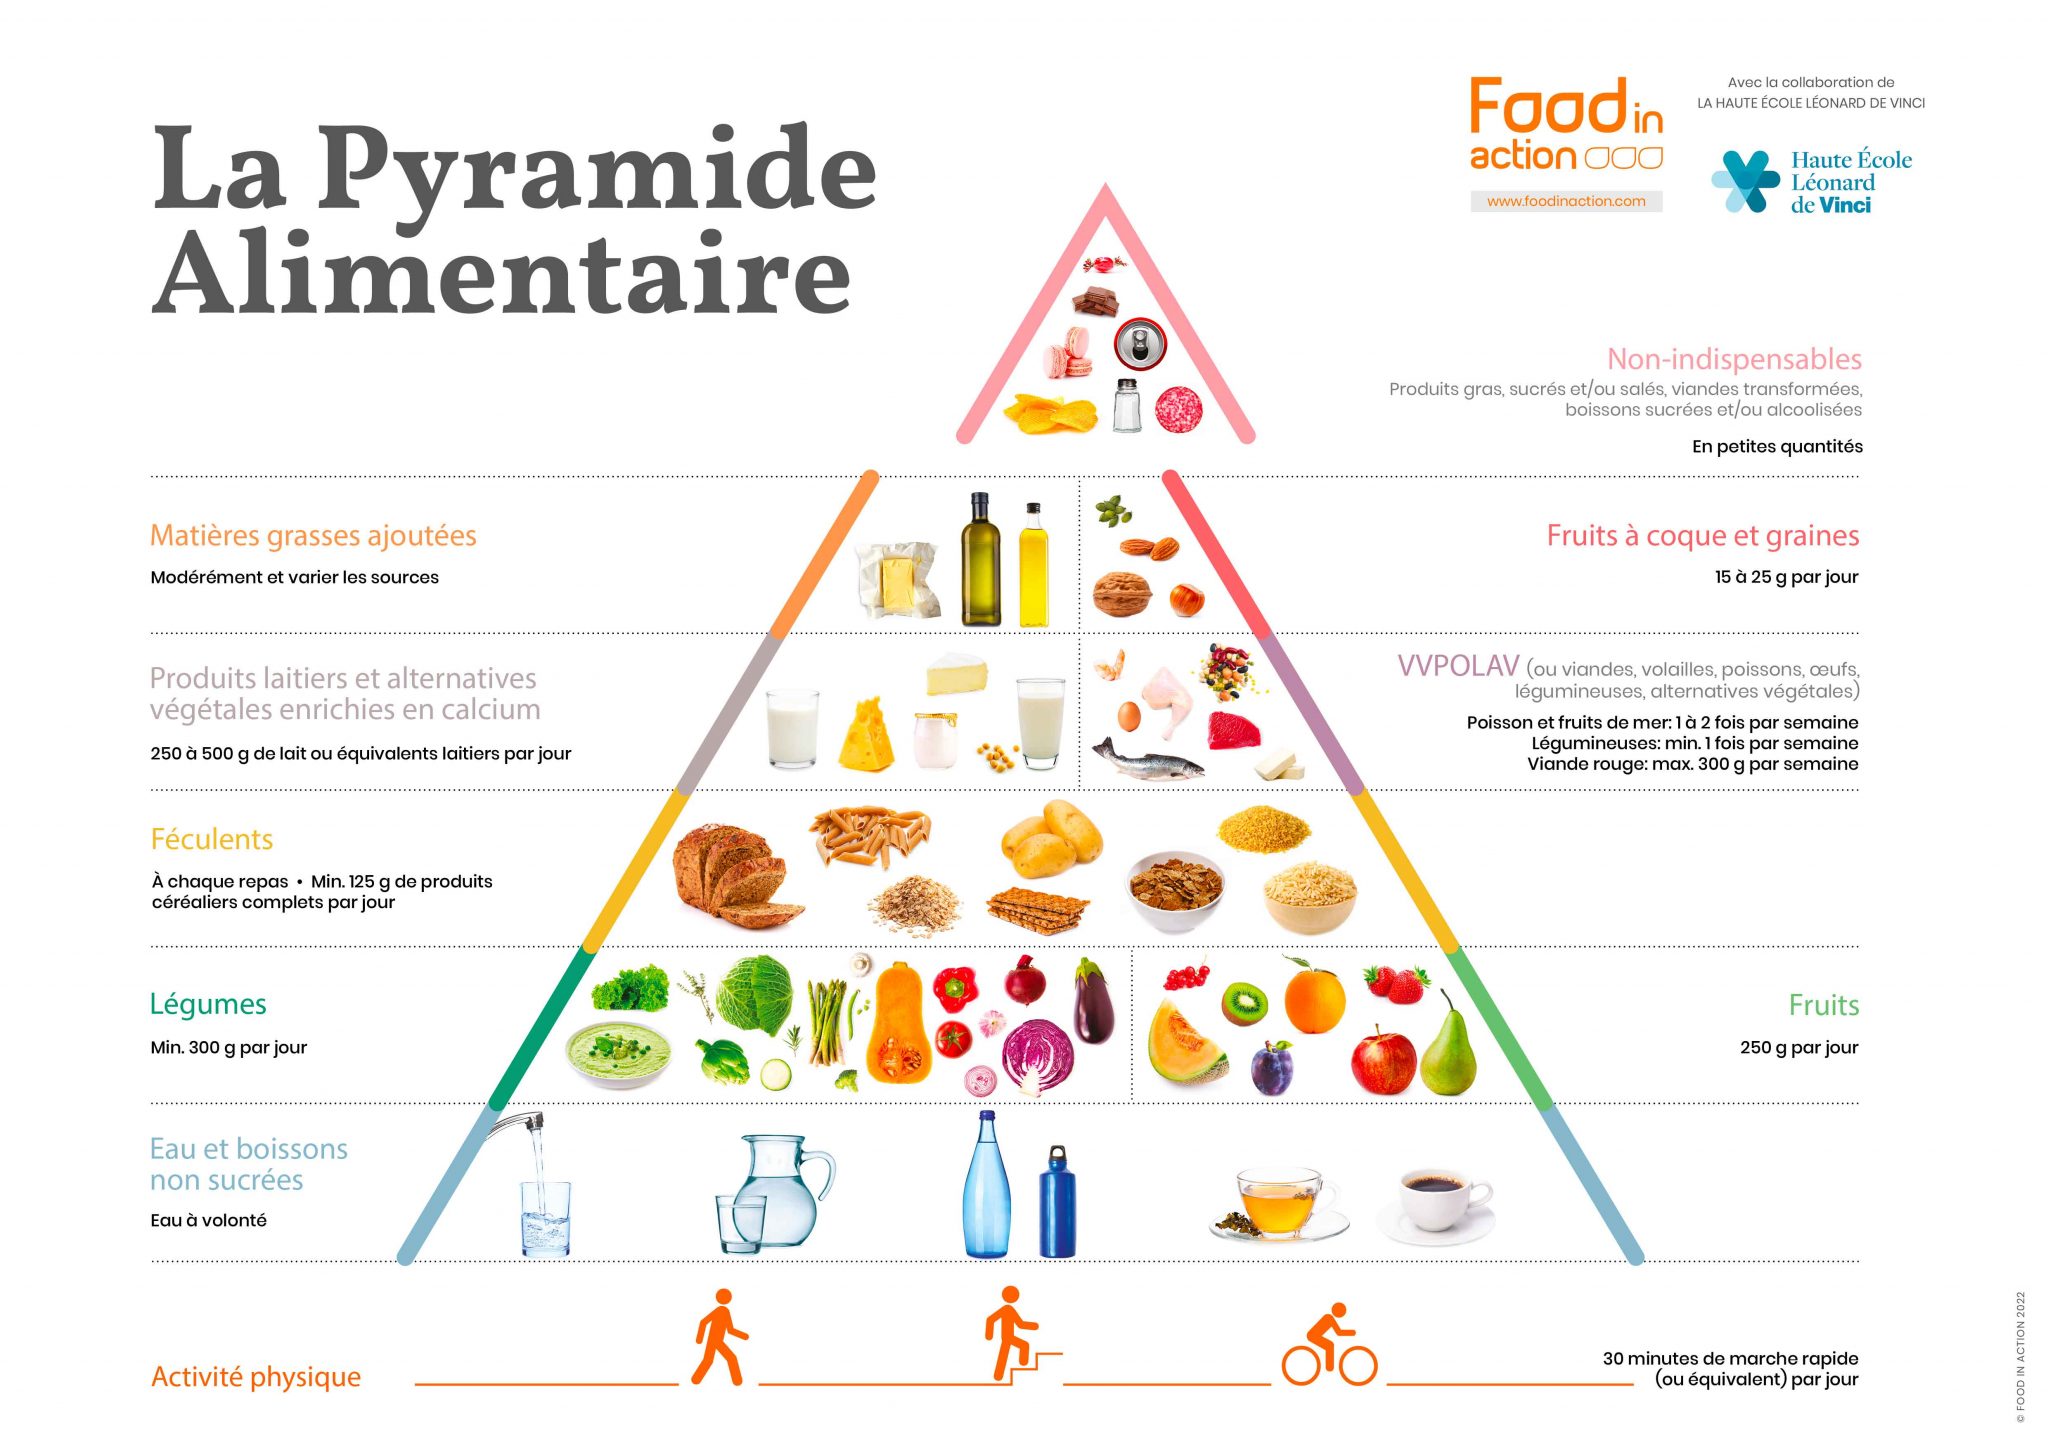 pyramide-alimentaire-2020-familles-recommandations-alimentaires-2048x1448.jpg